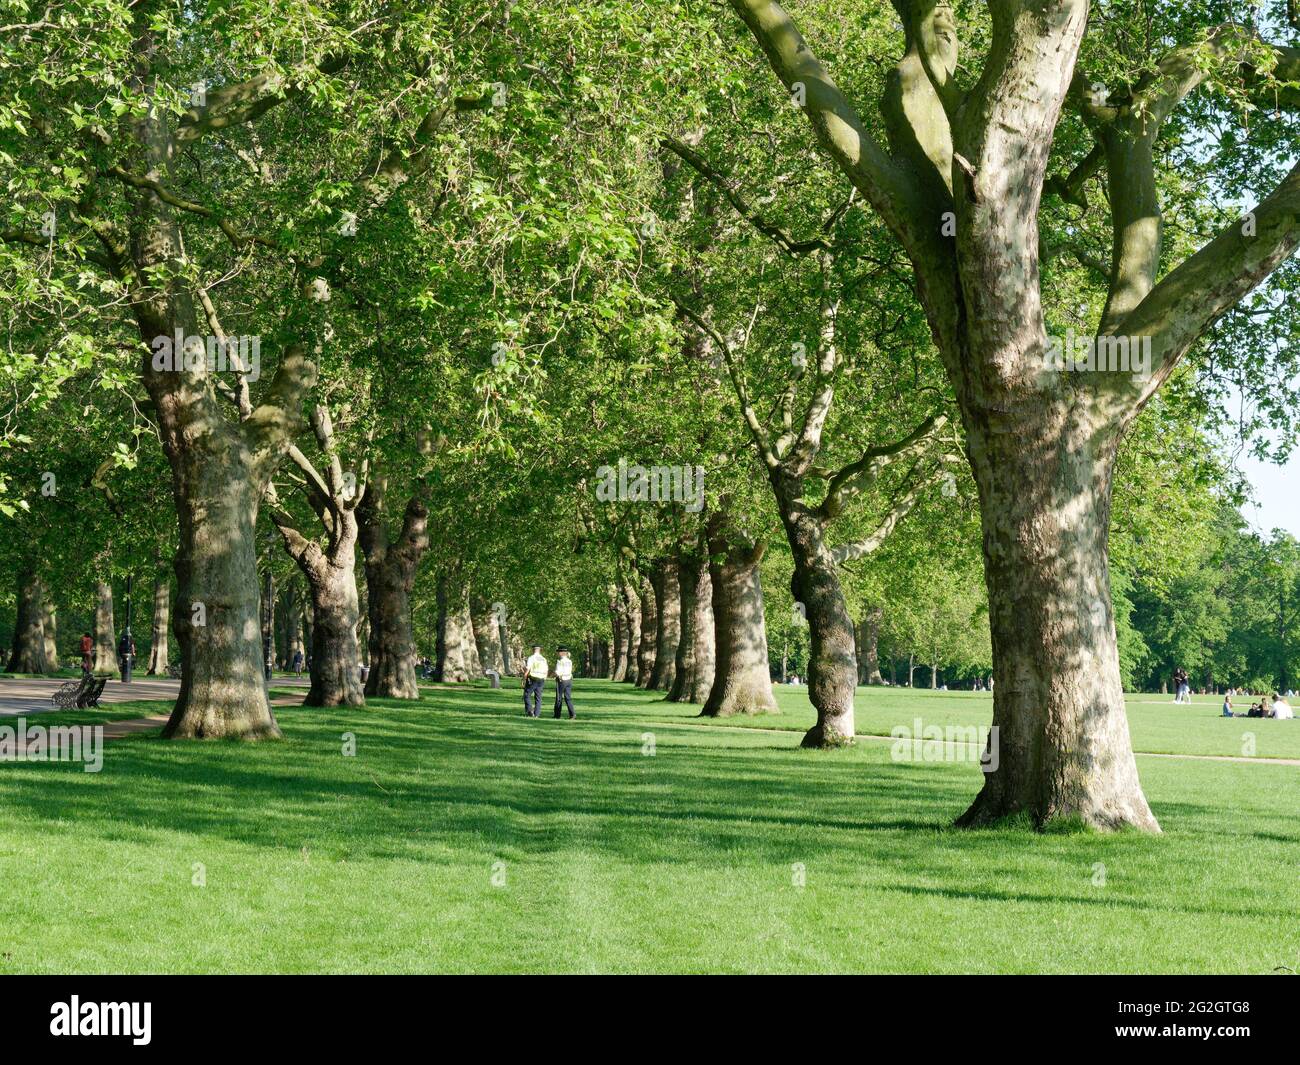 London, Greater London, England - 27 May 2021: 2 police officers walking through trees in Hyde Park wearing hi vis jackets Stock Photo